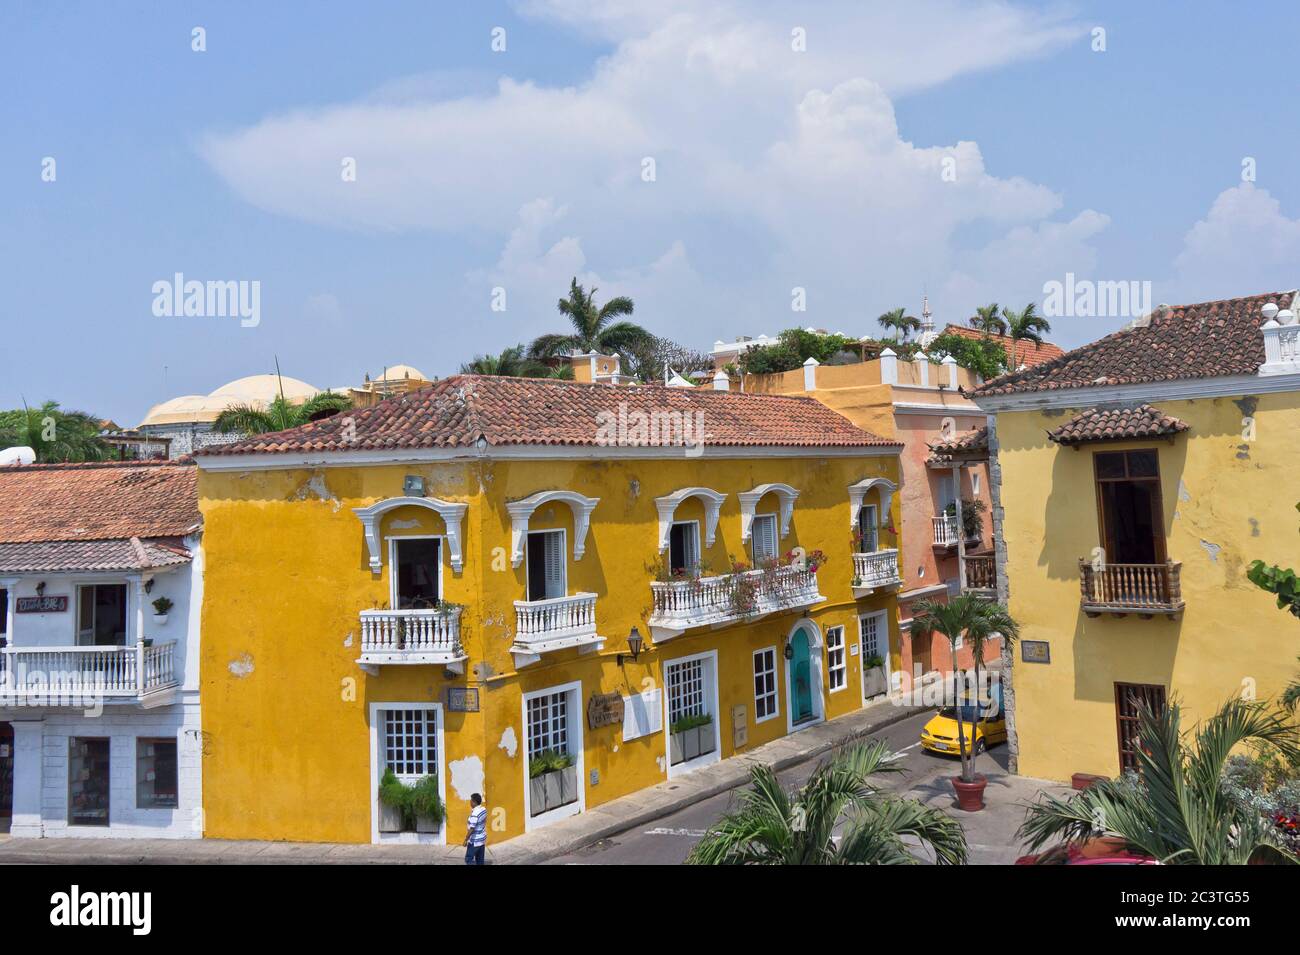 Old city street view Cartagena, Colombia, South America Stock Photo